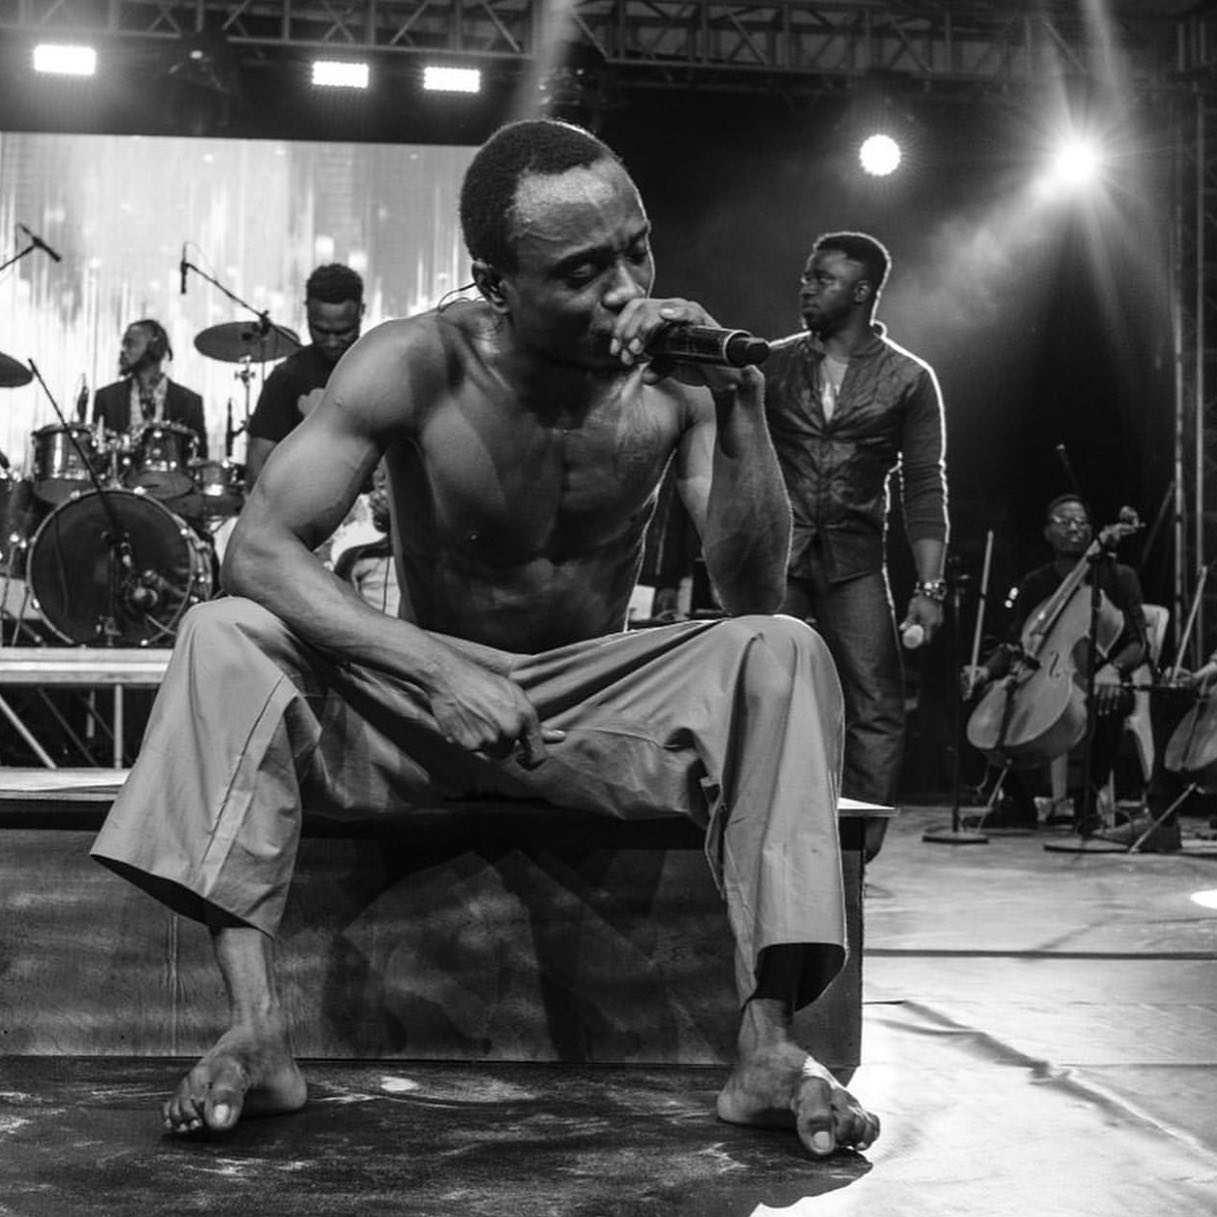 The Brymo Conundrum: Struggling with Self-Sabotage and Redemption